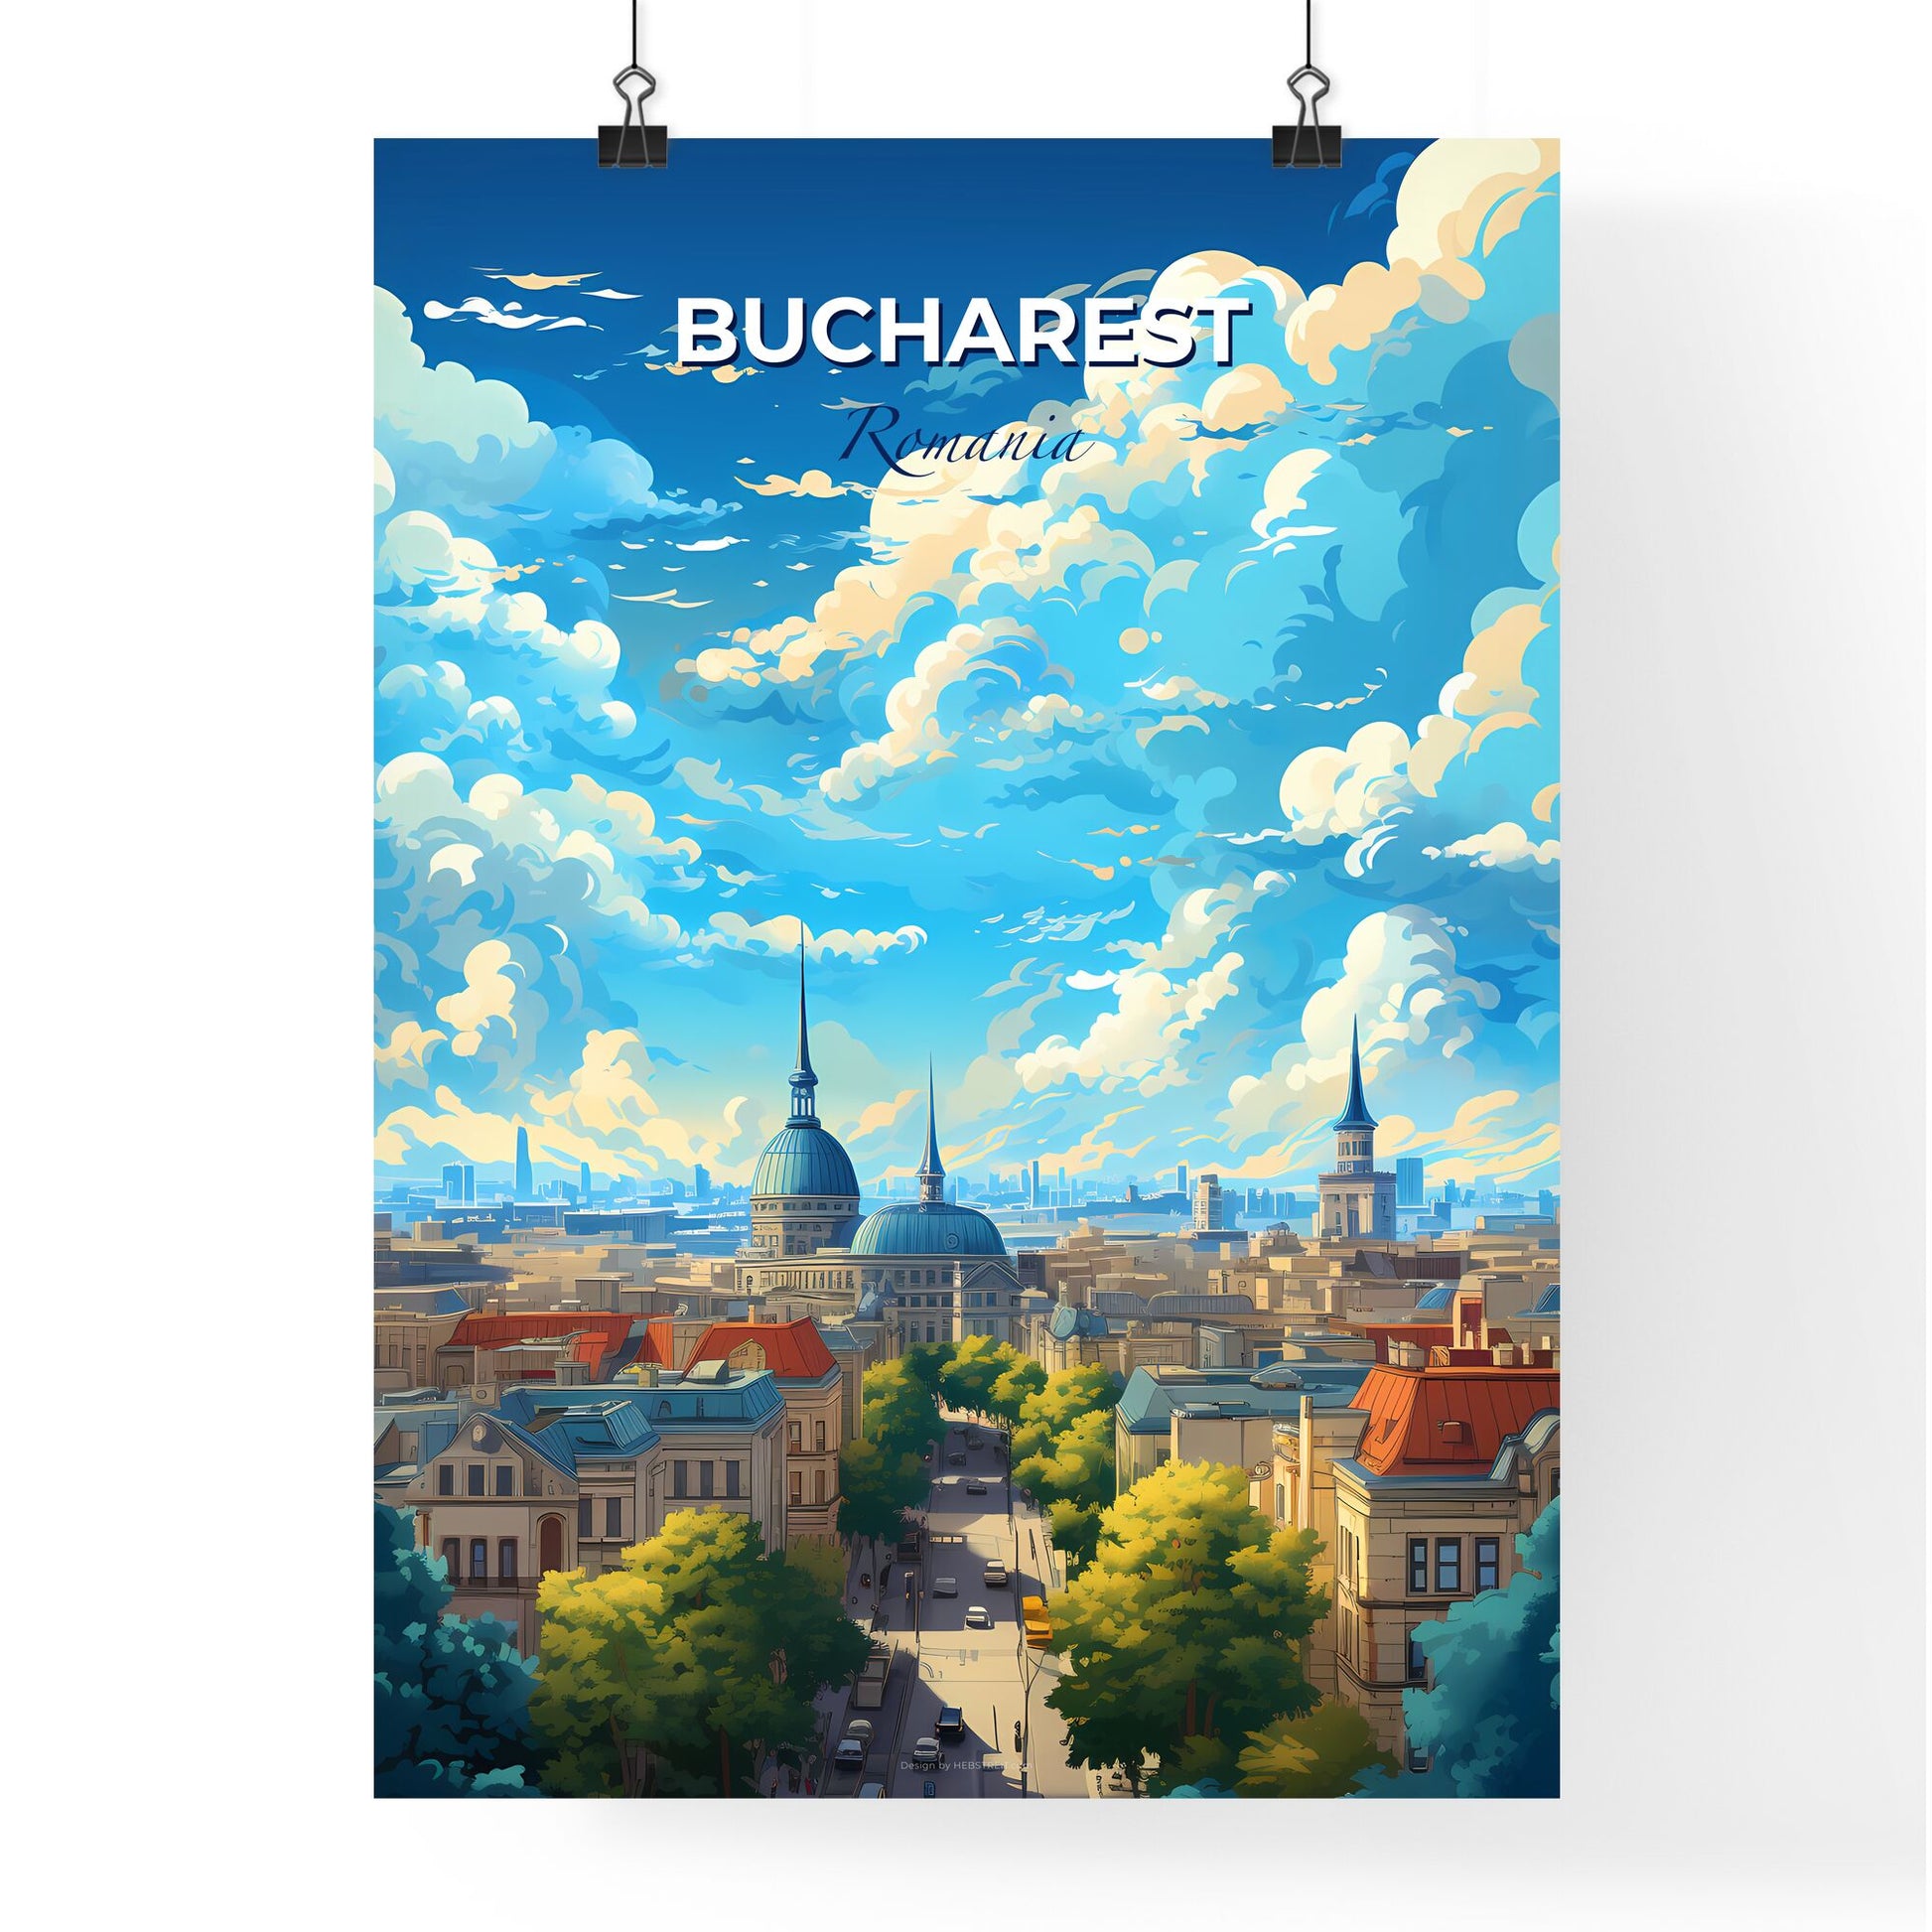 Bucharest Romania Skyline - A City With Many Towers And Trees - Customizable Travel Gift Default Title